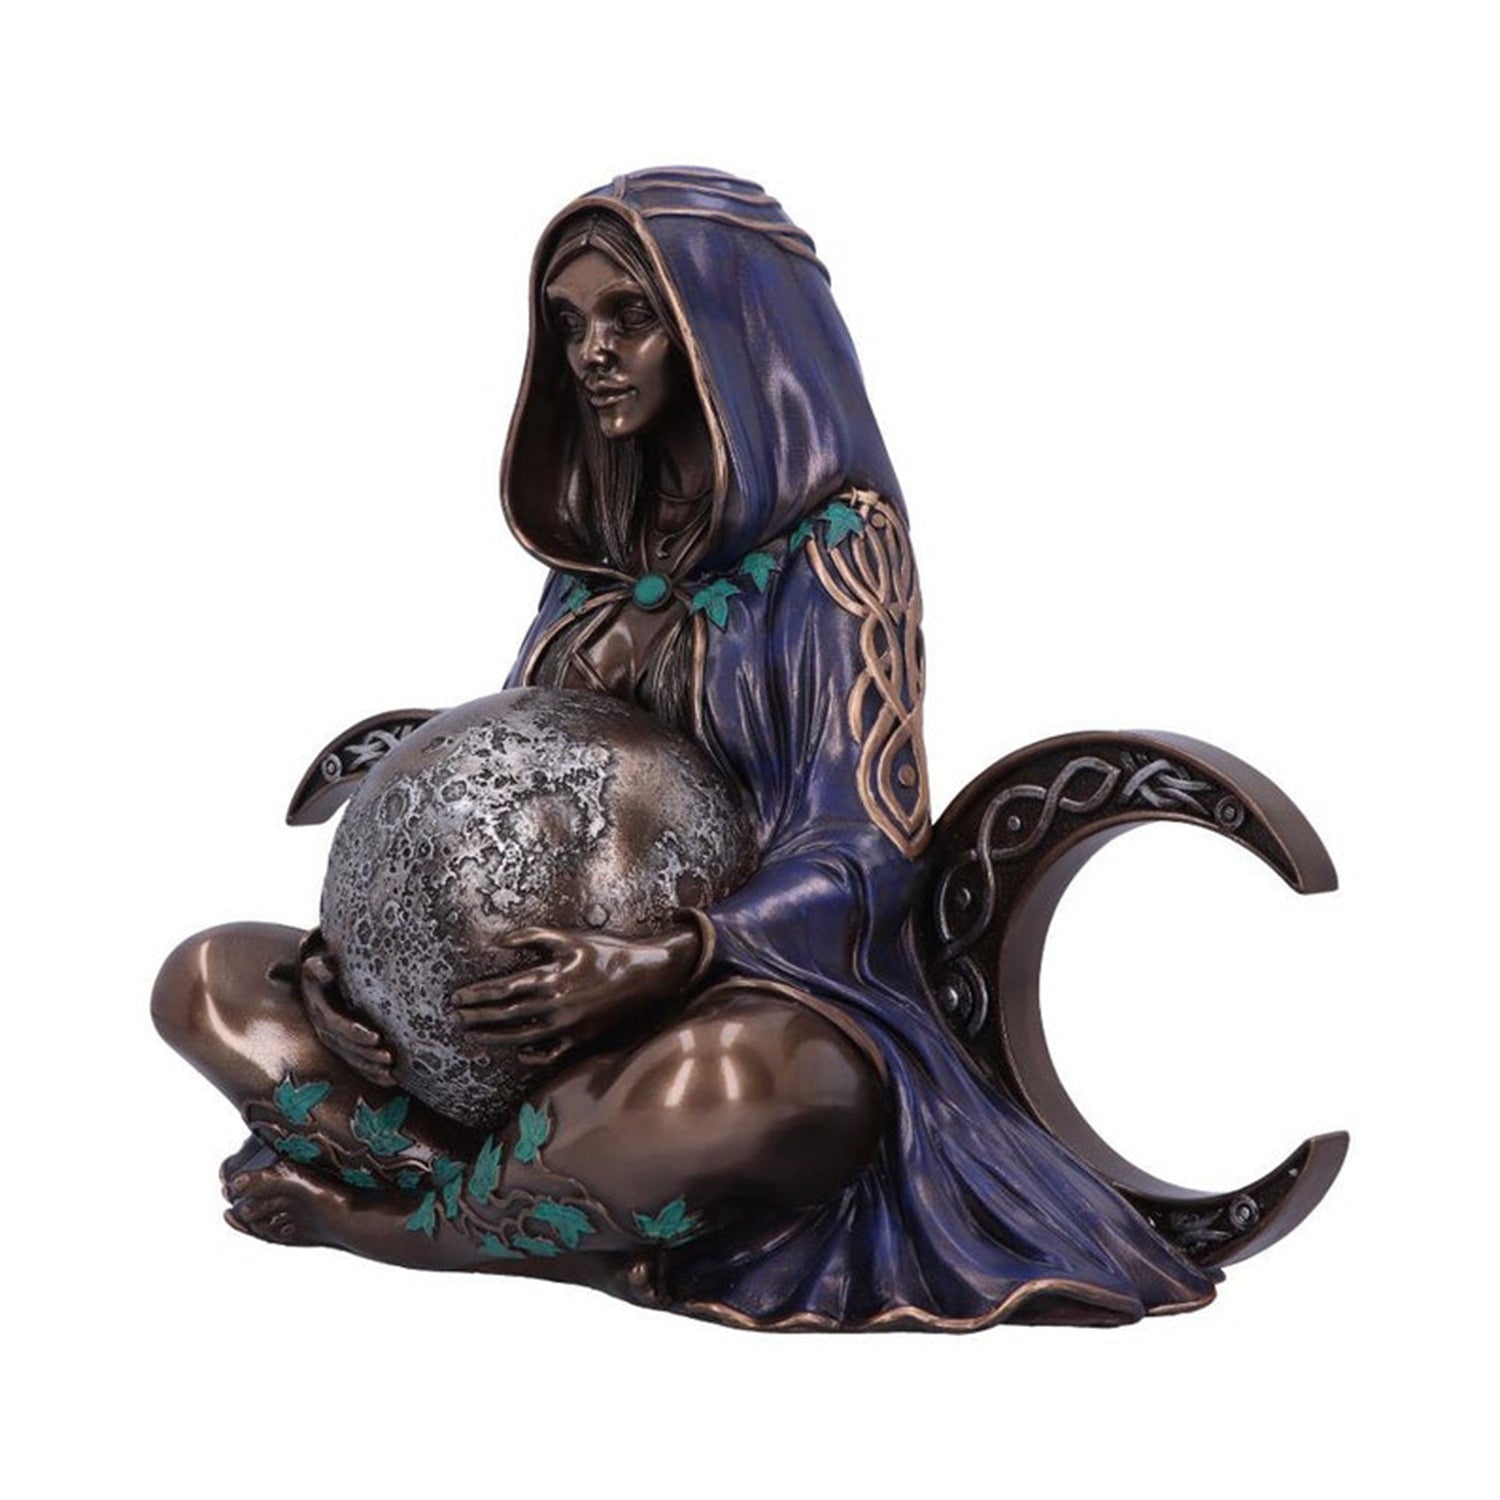 The New Mother Earth Millennial Gaia Statue Figurine - Creatrix of Life Gaia Mother of Earth Oberon Zell Milenial Te Fiti Type Goddess Statue